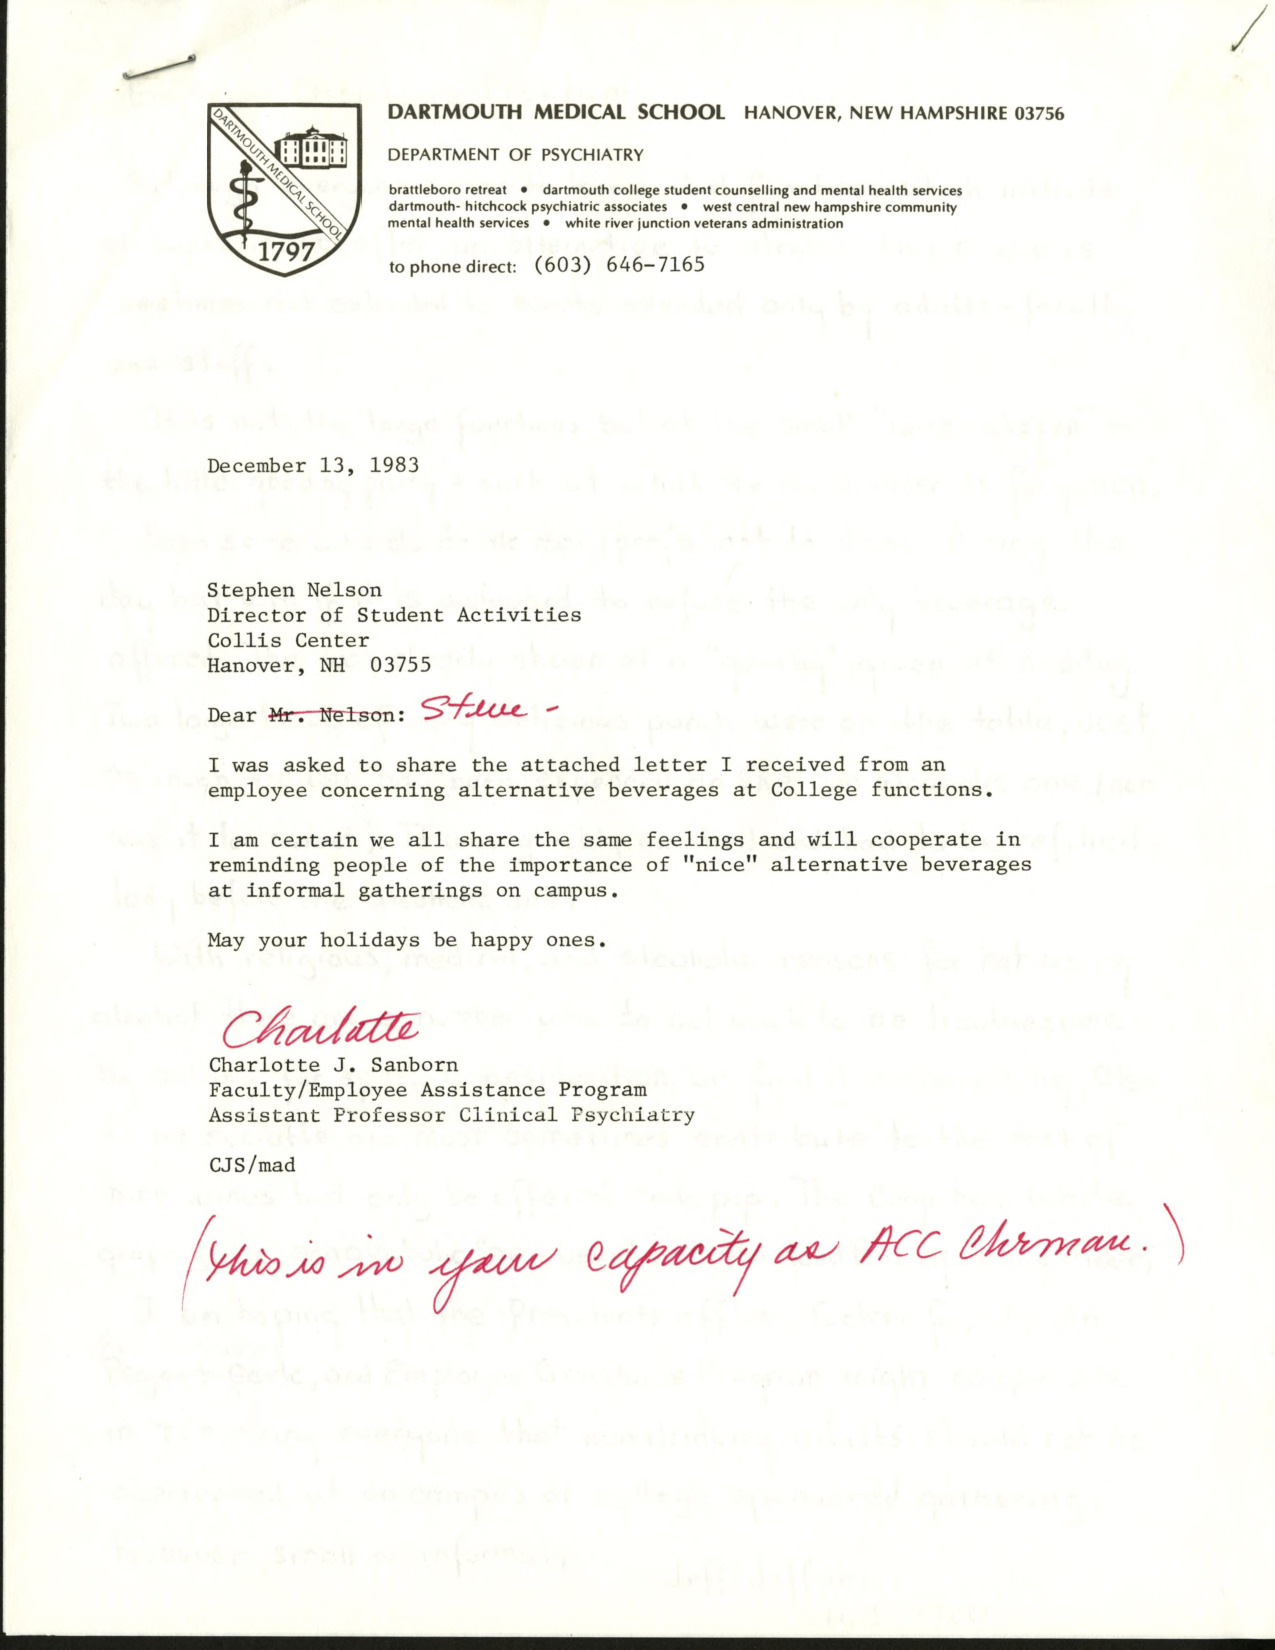 Memo from Charlotte Sanborn to Stephen Nelson 1983